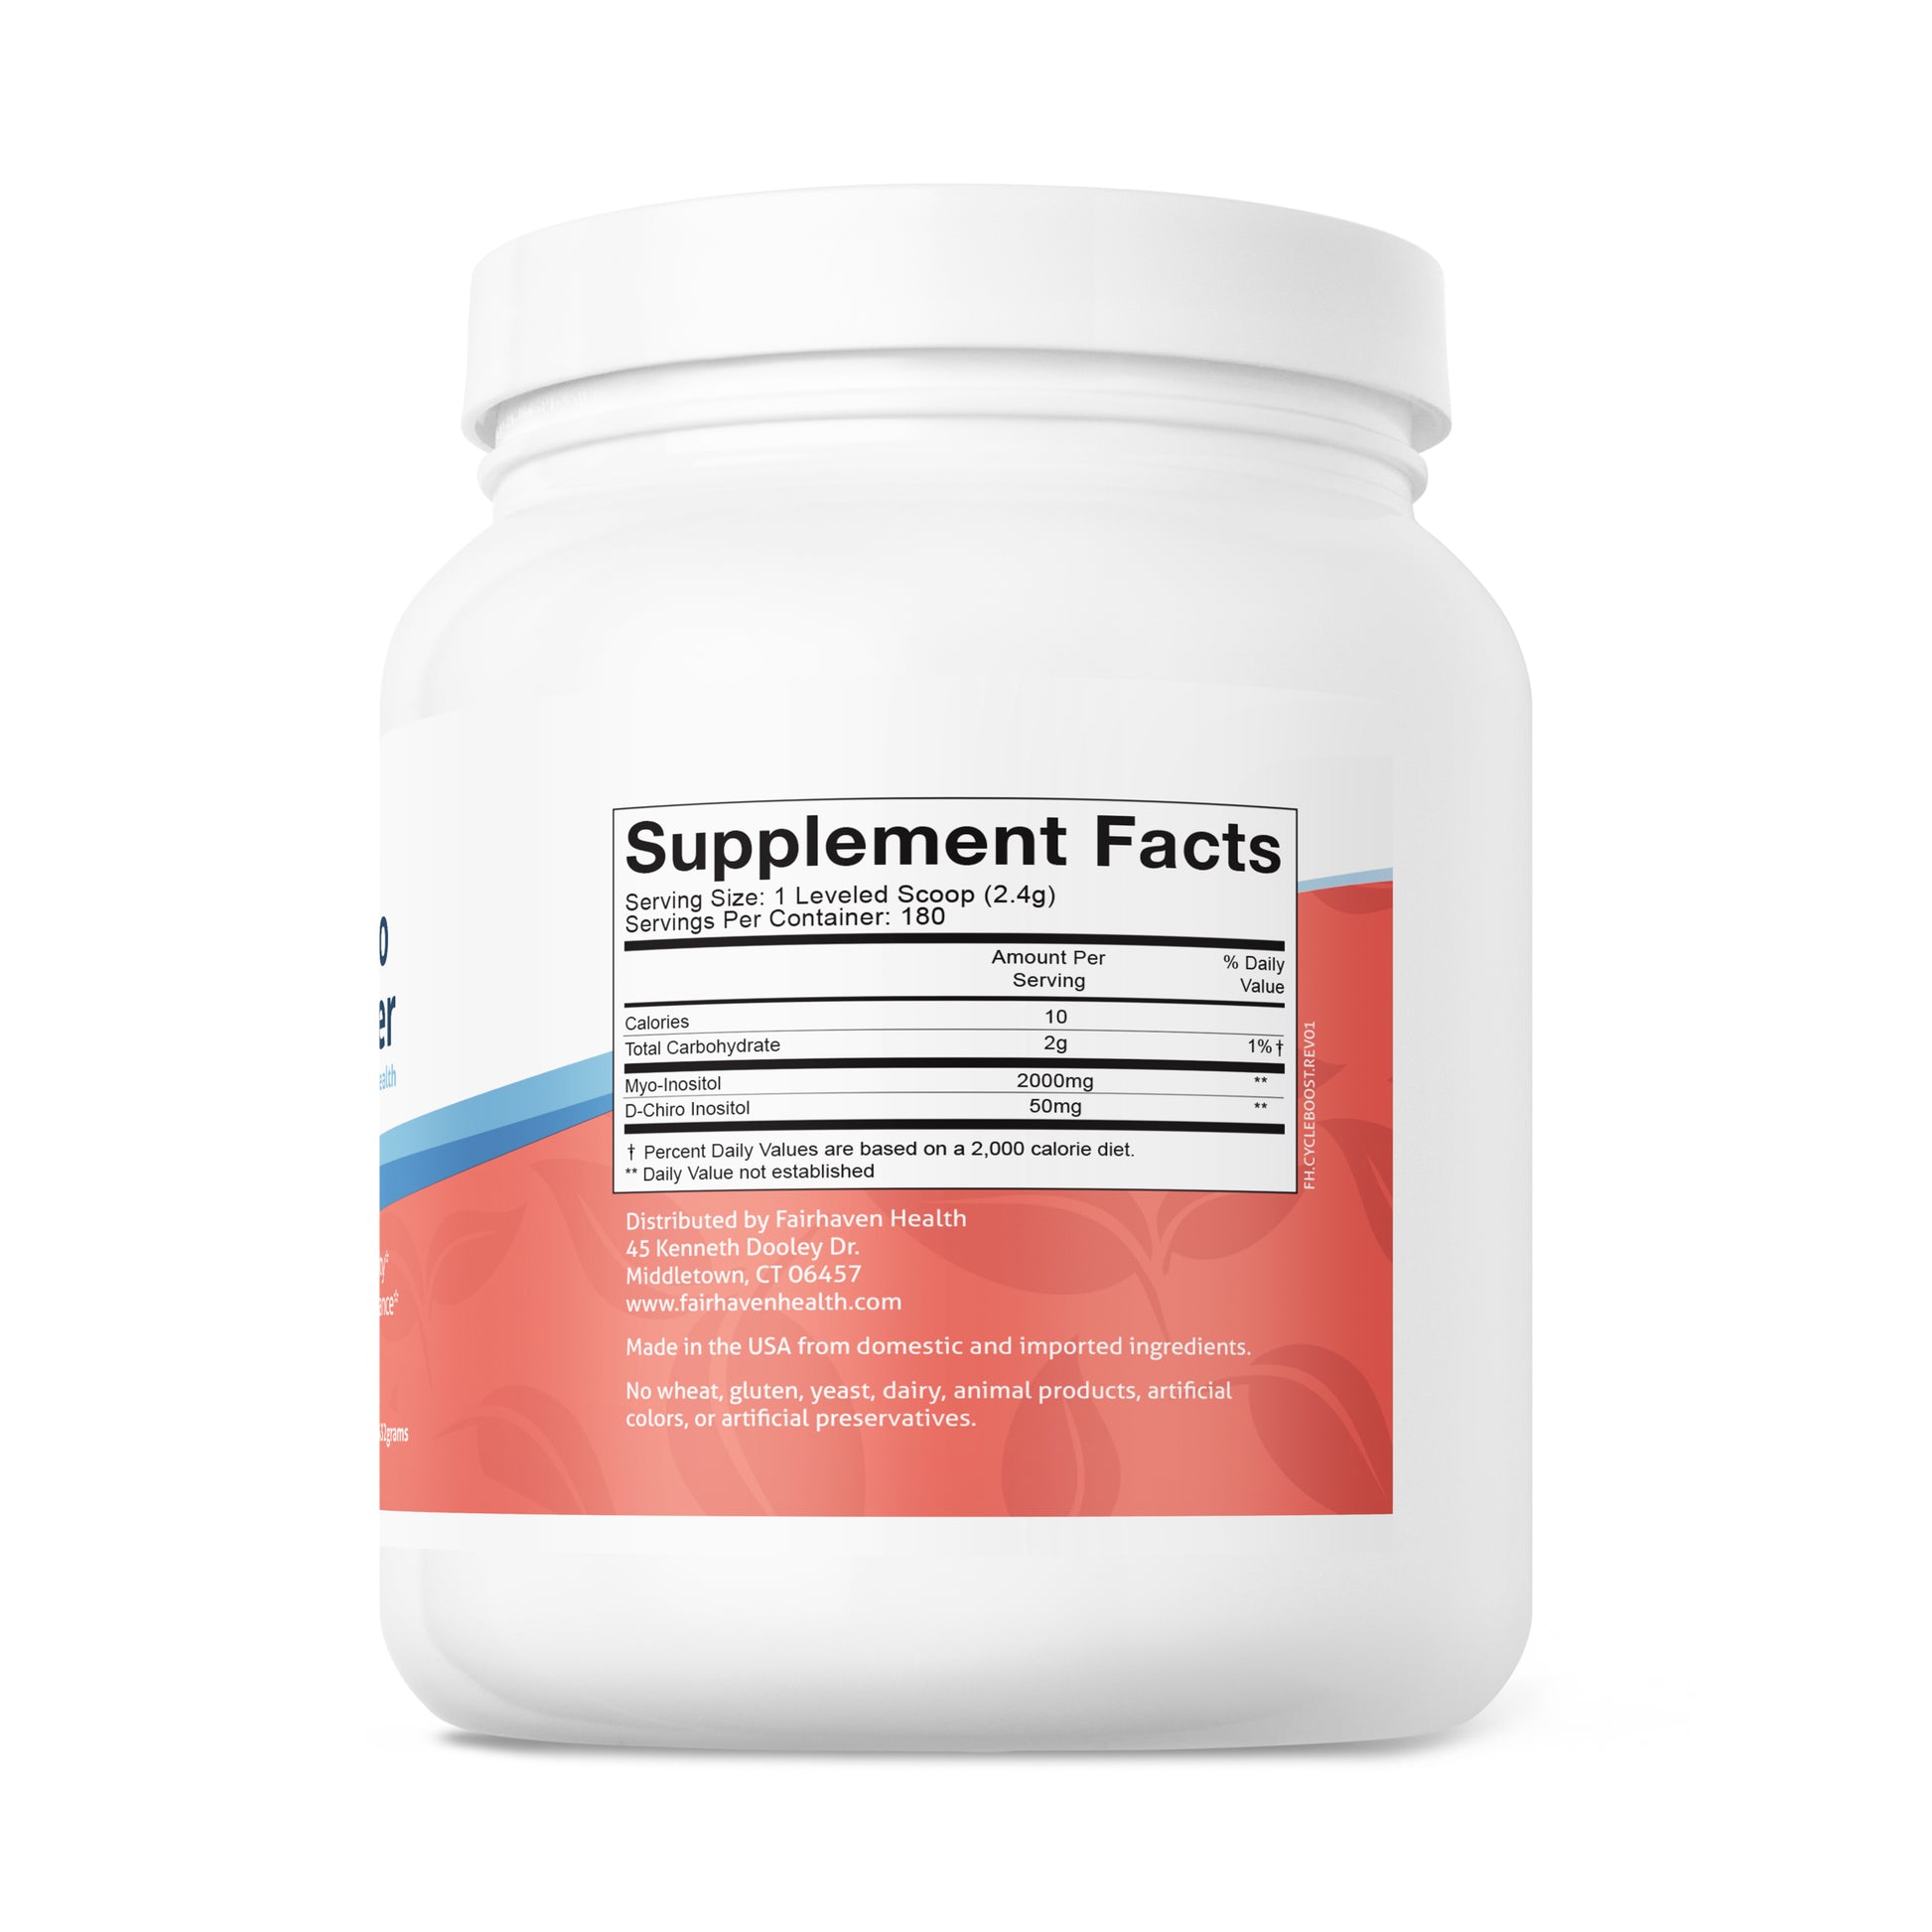 Fairhaven Health Myo + D-Chiro Inositol Powder servings size and ingredients.